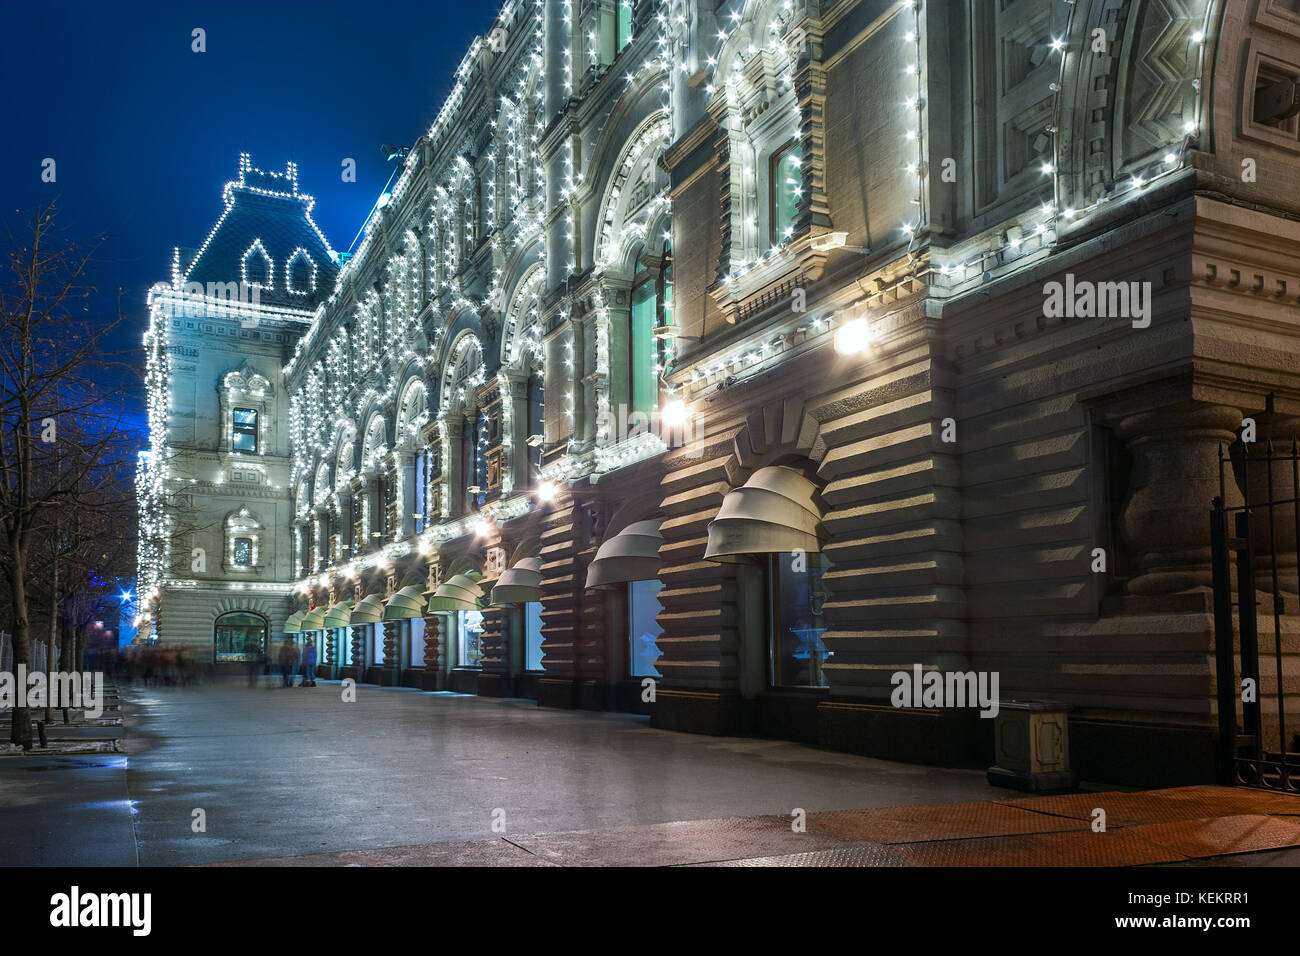 Old russian architecture example: Main Department Store (GUM) at the Red Square in Moscow by winter evening with Christmas illumination with people wa Stock Photo